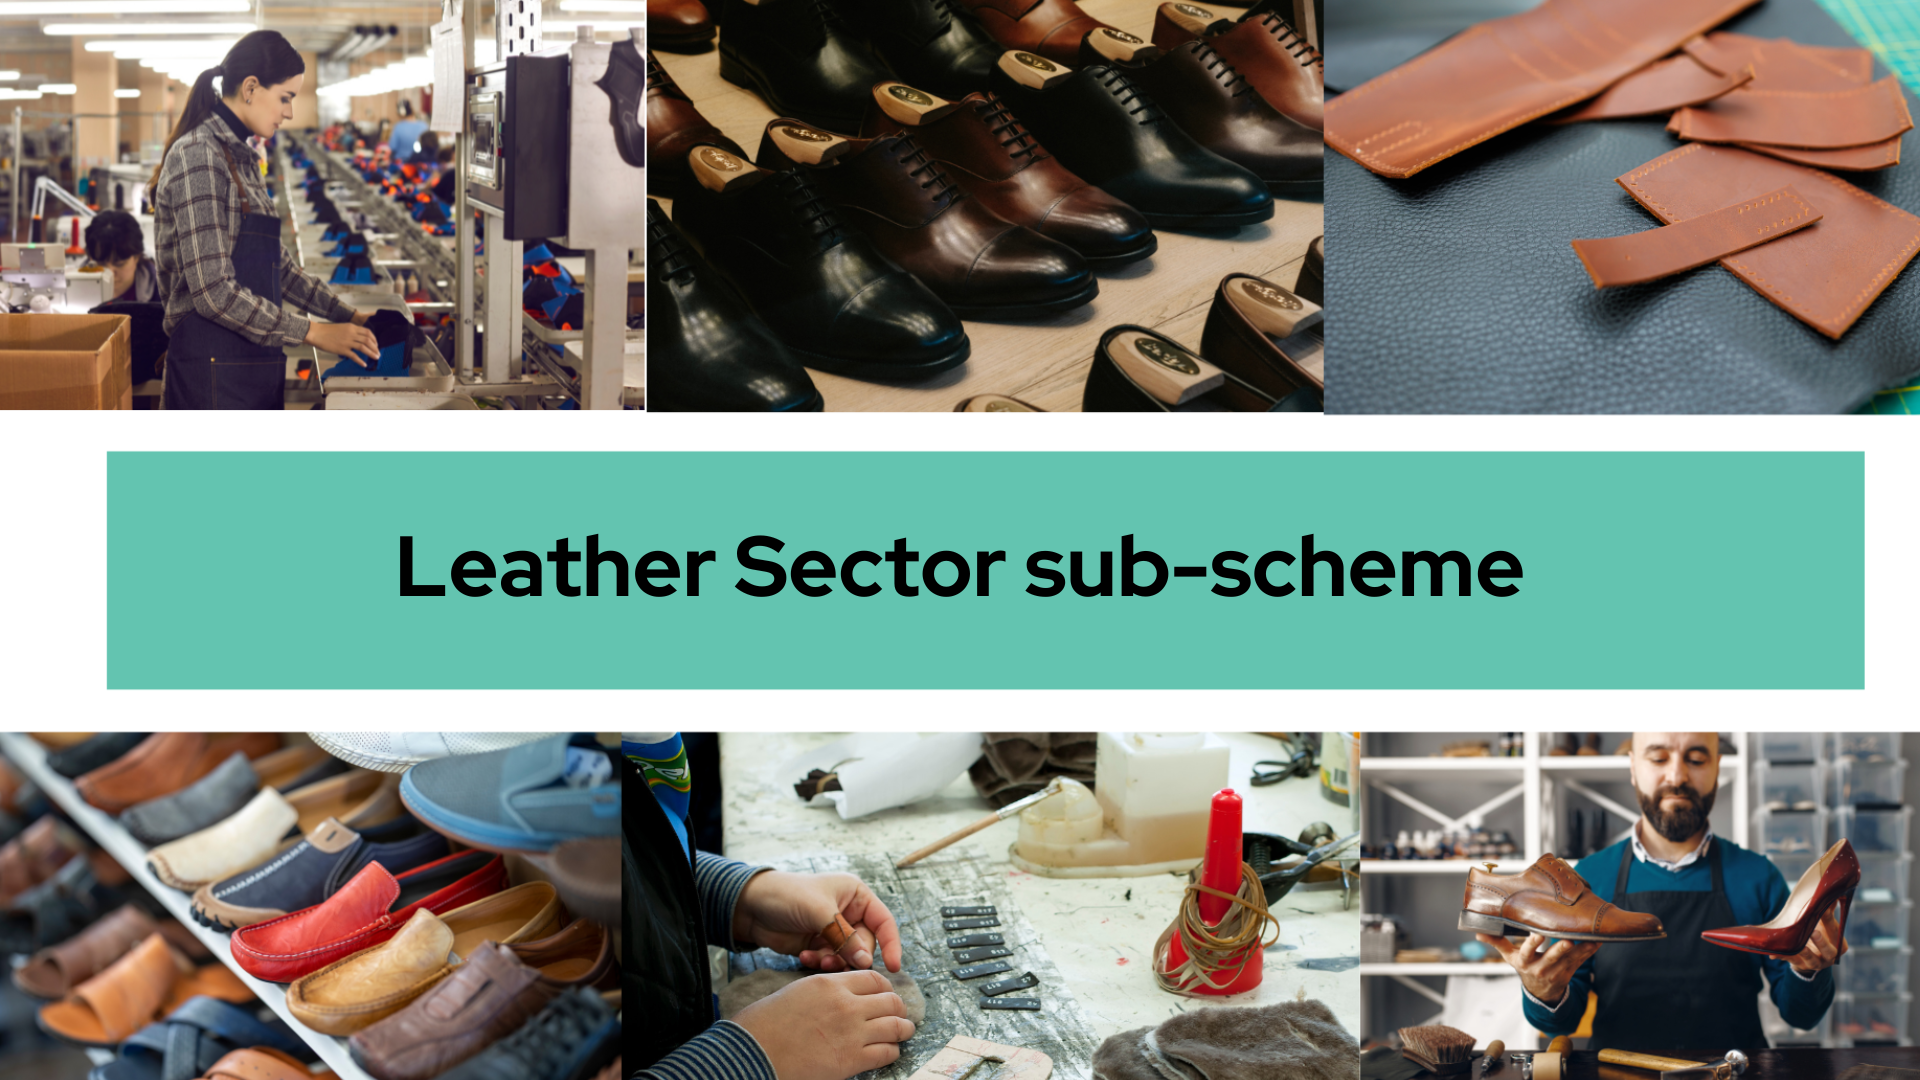 Integrated Development of Leather Sector sub-scheme